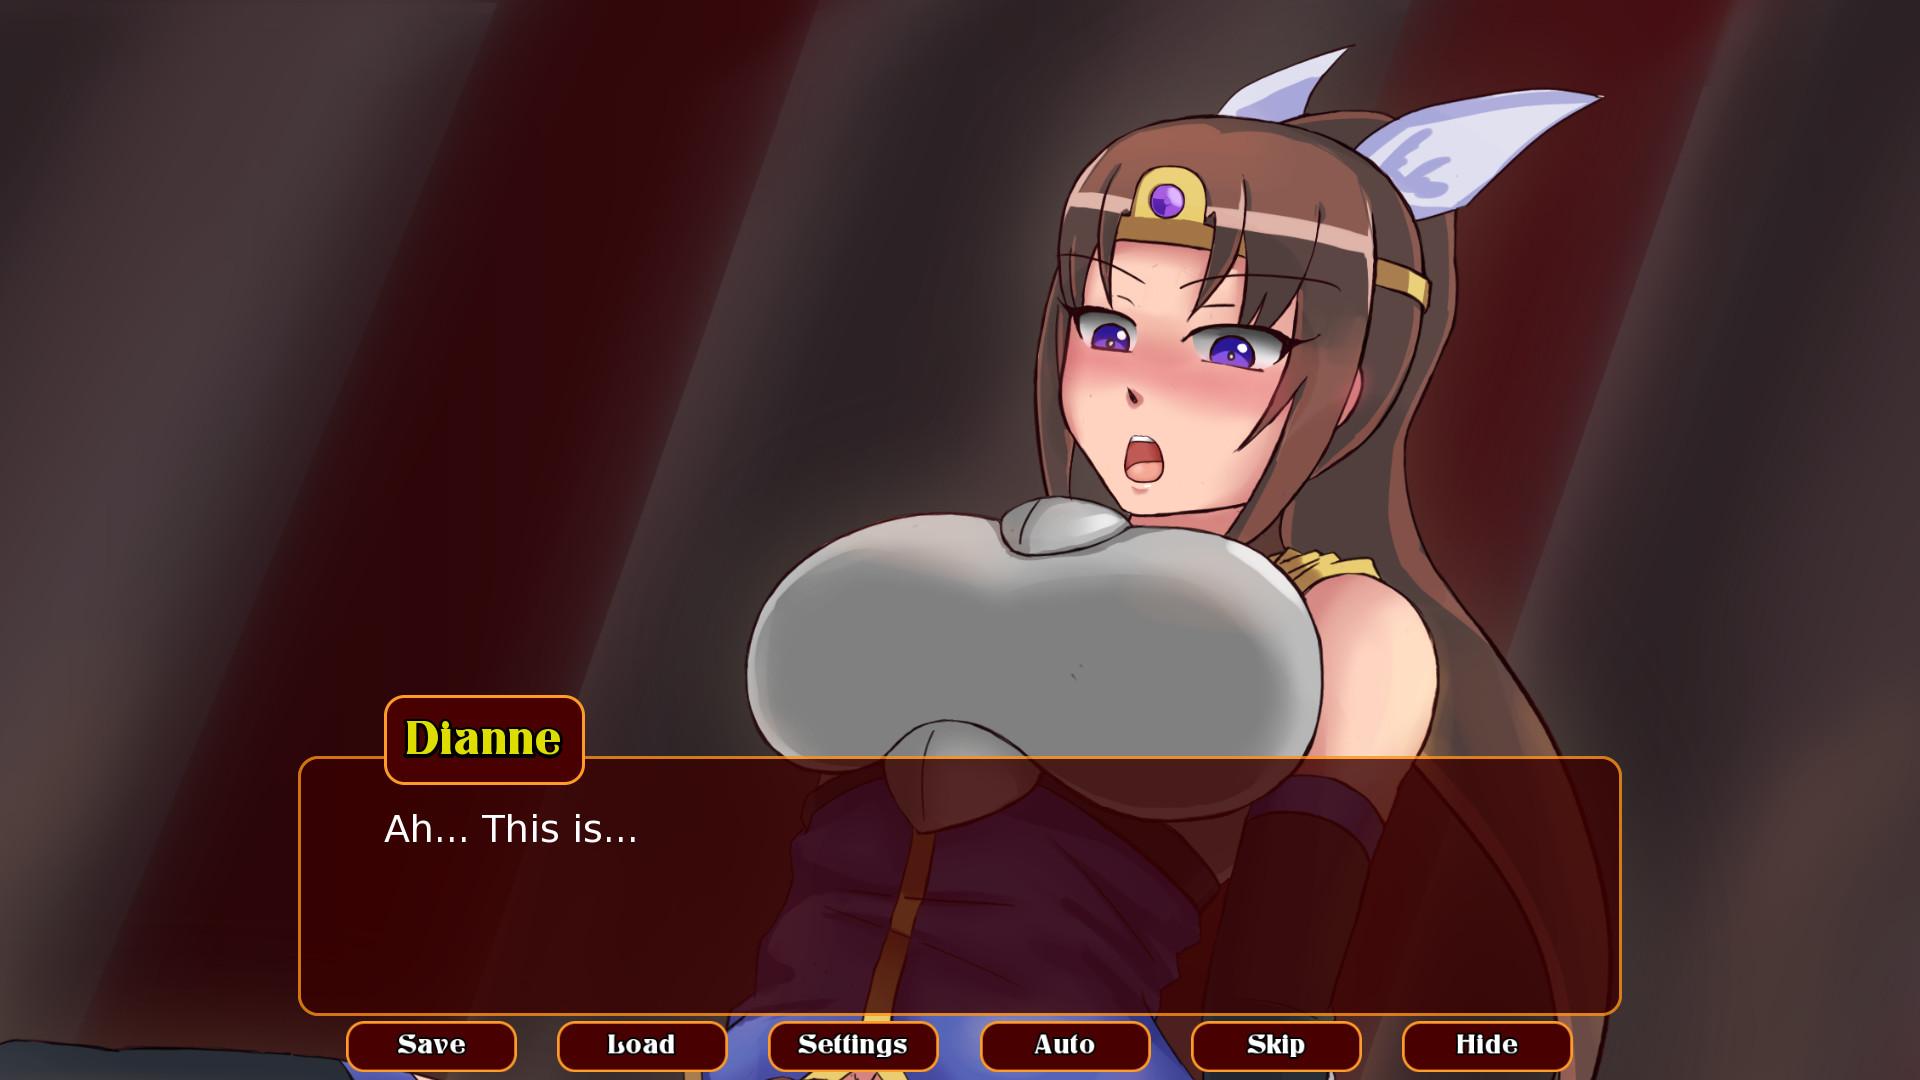 Screenshot №1 from game Demon King Domination: Deluxe Edition